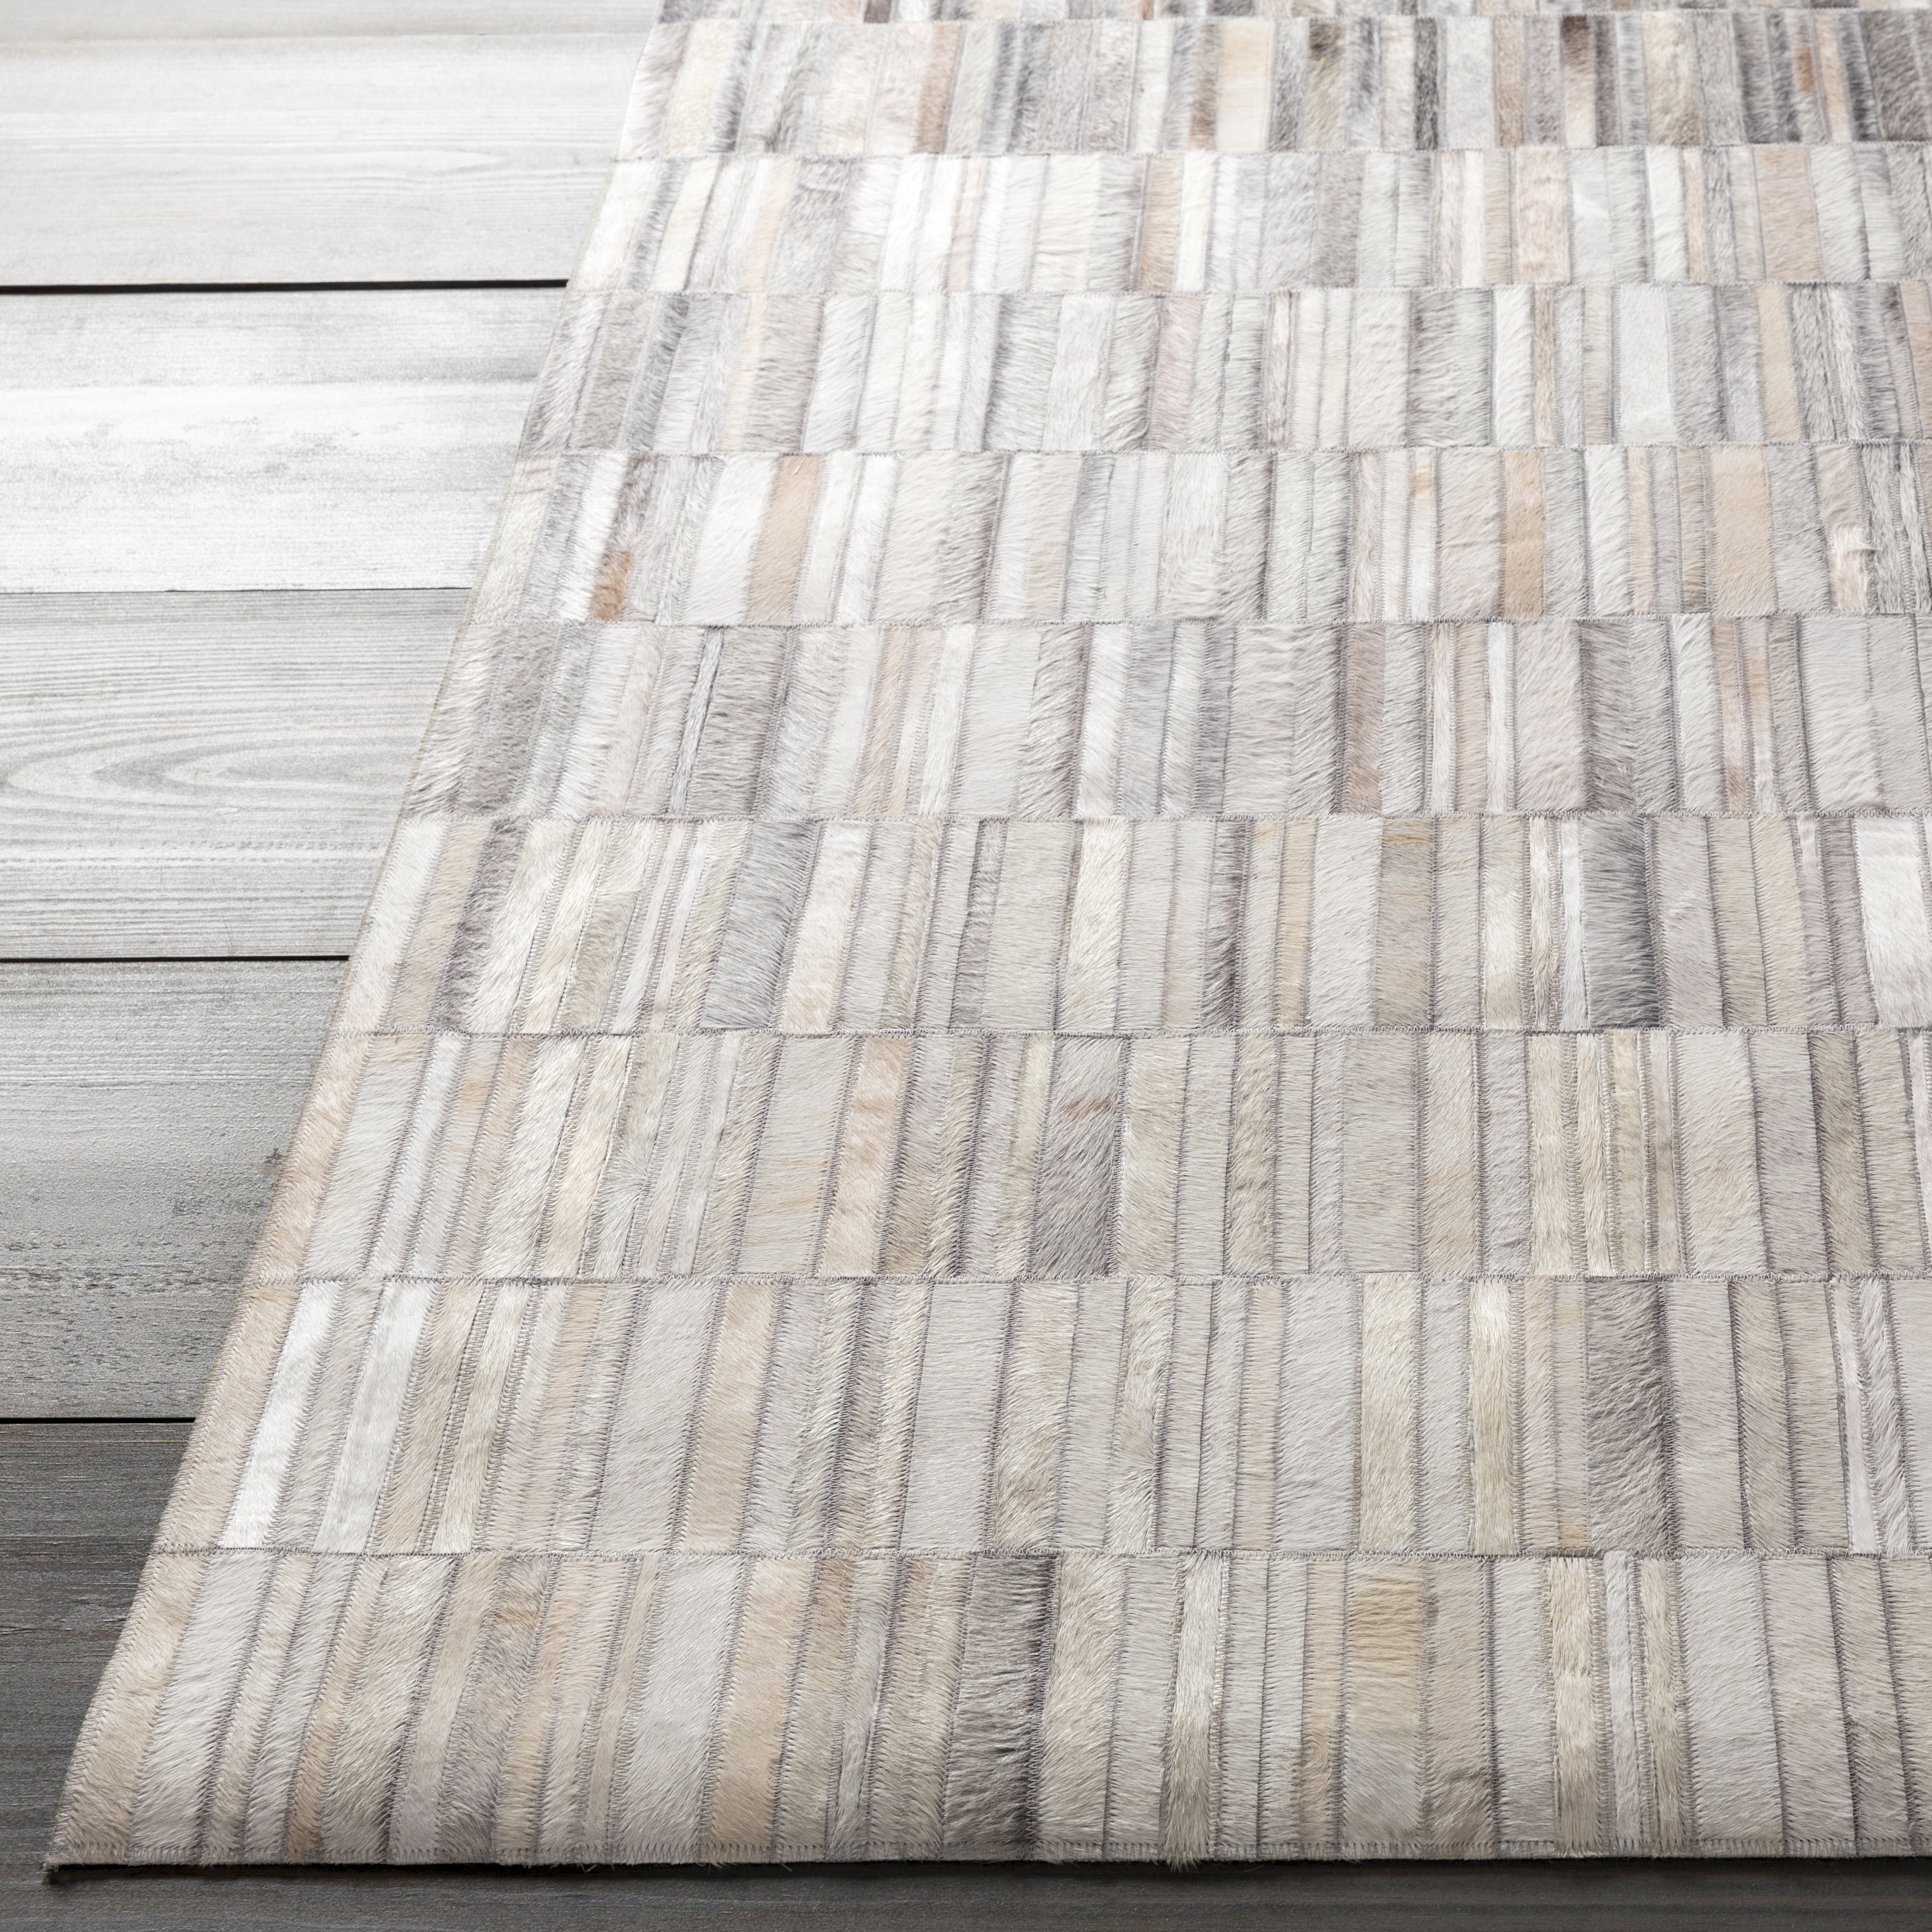 Outback Rug, 8' x 10' - Image 1